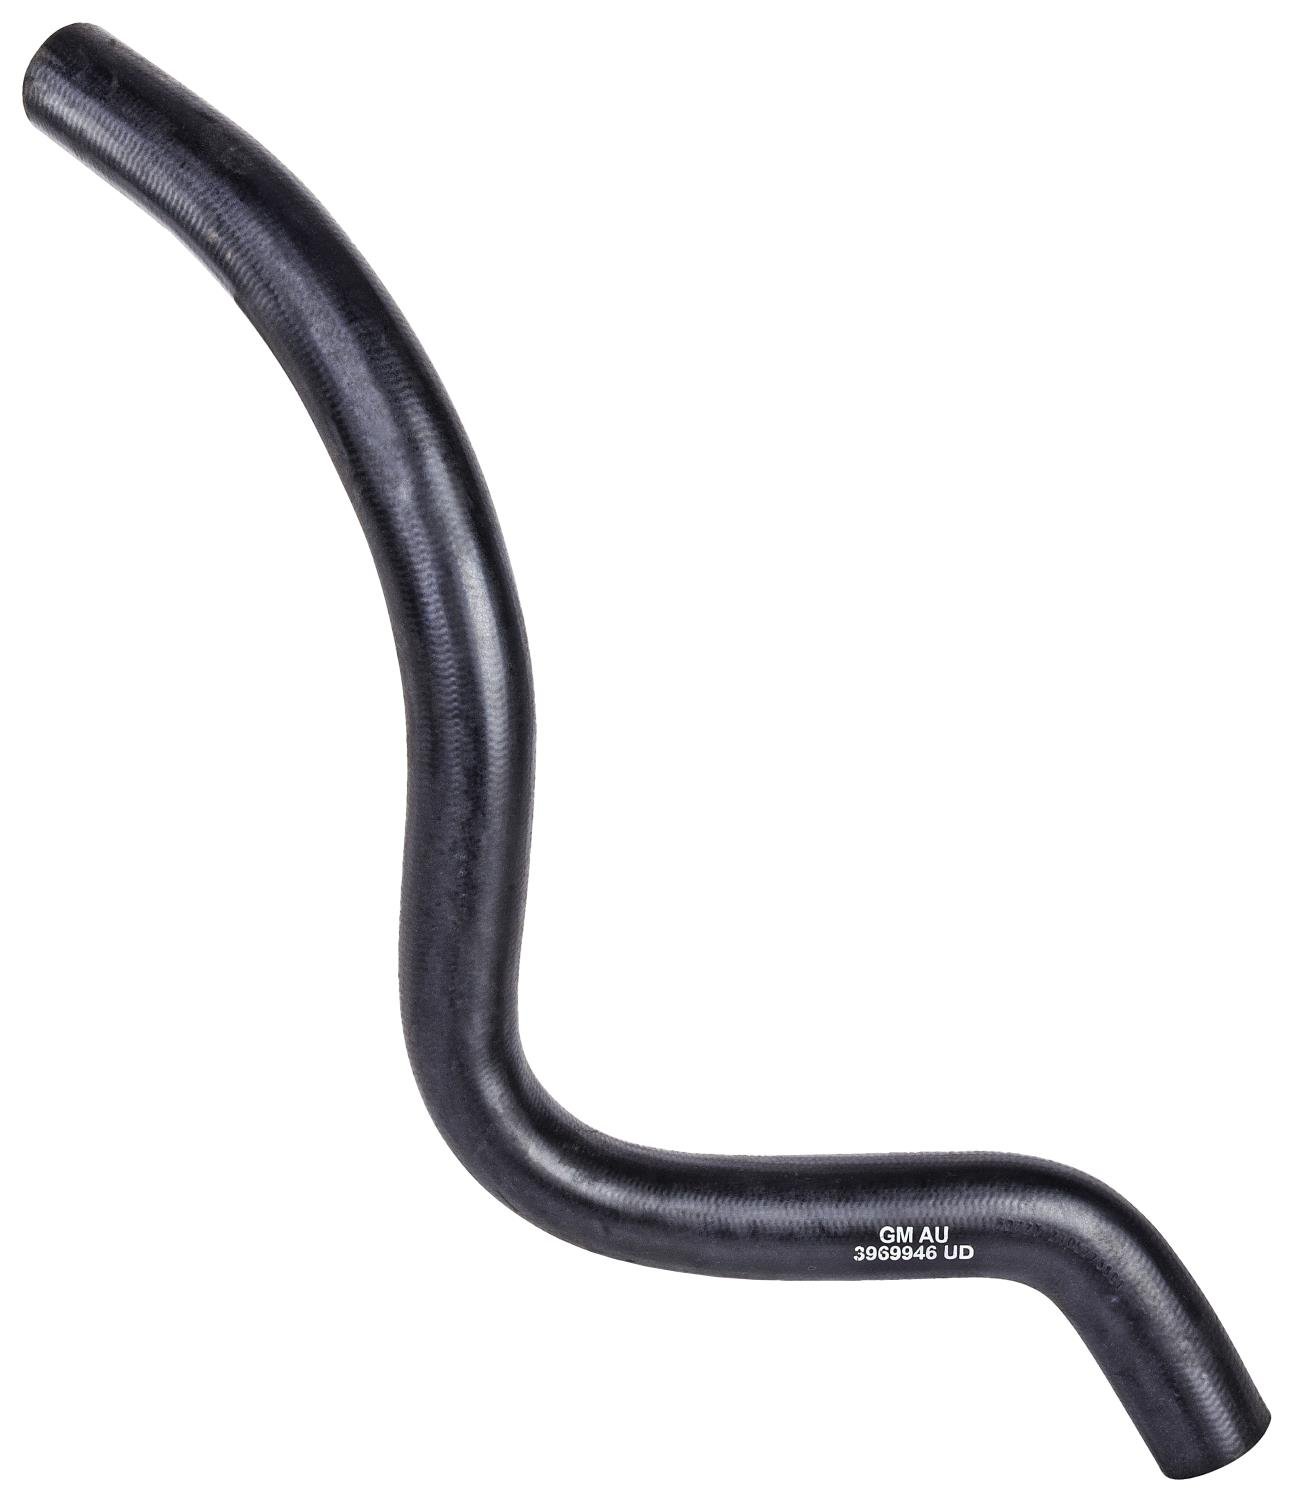 Upper Radiator Hose for 1970-1972 Chevrolet Monte Carlo [Direct-Fit Replacement for GM 3969946]